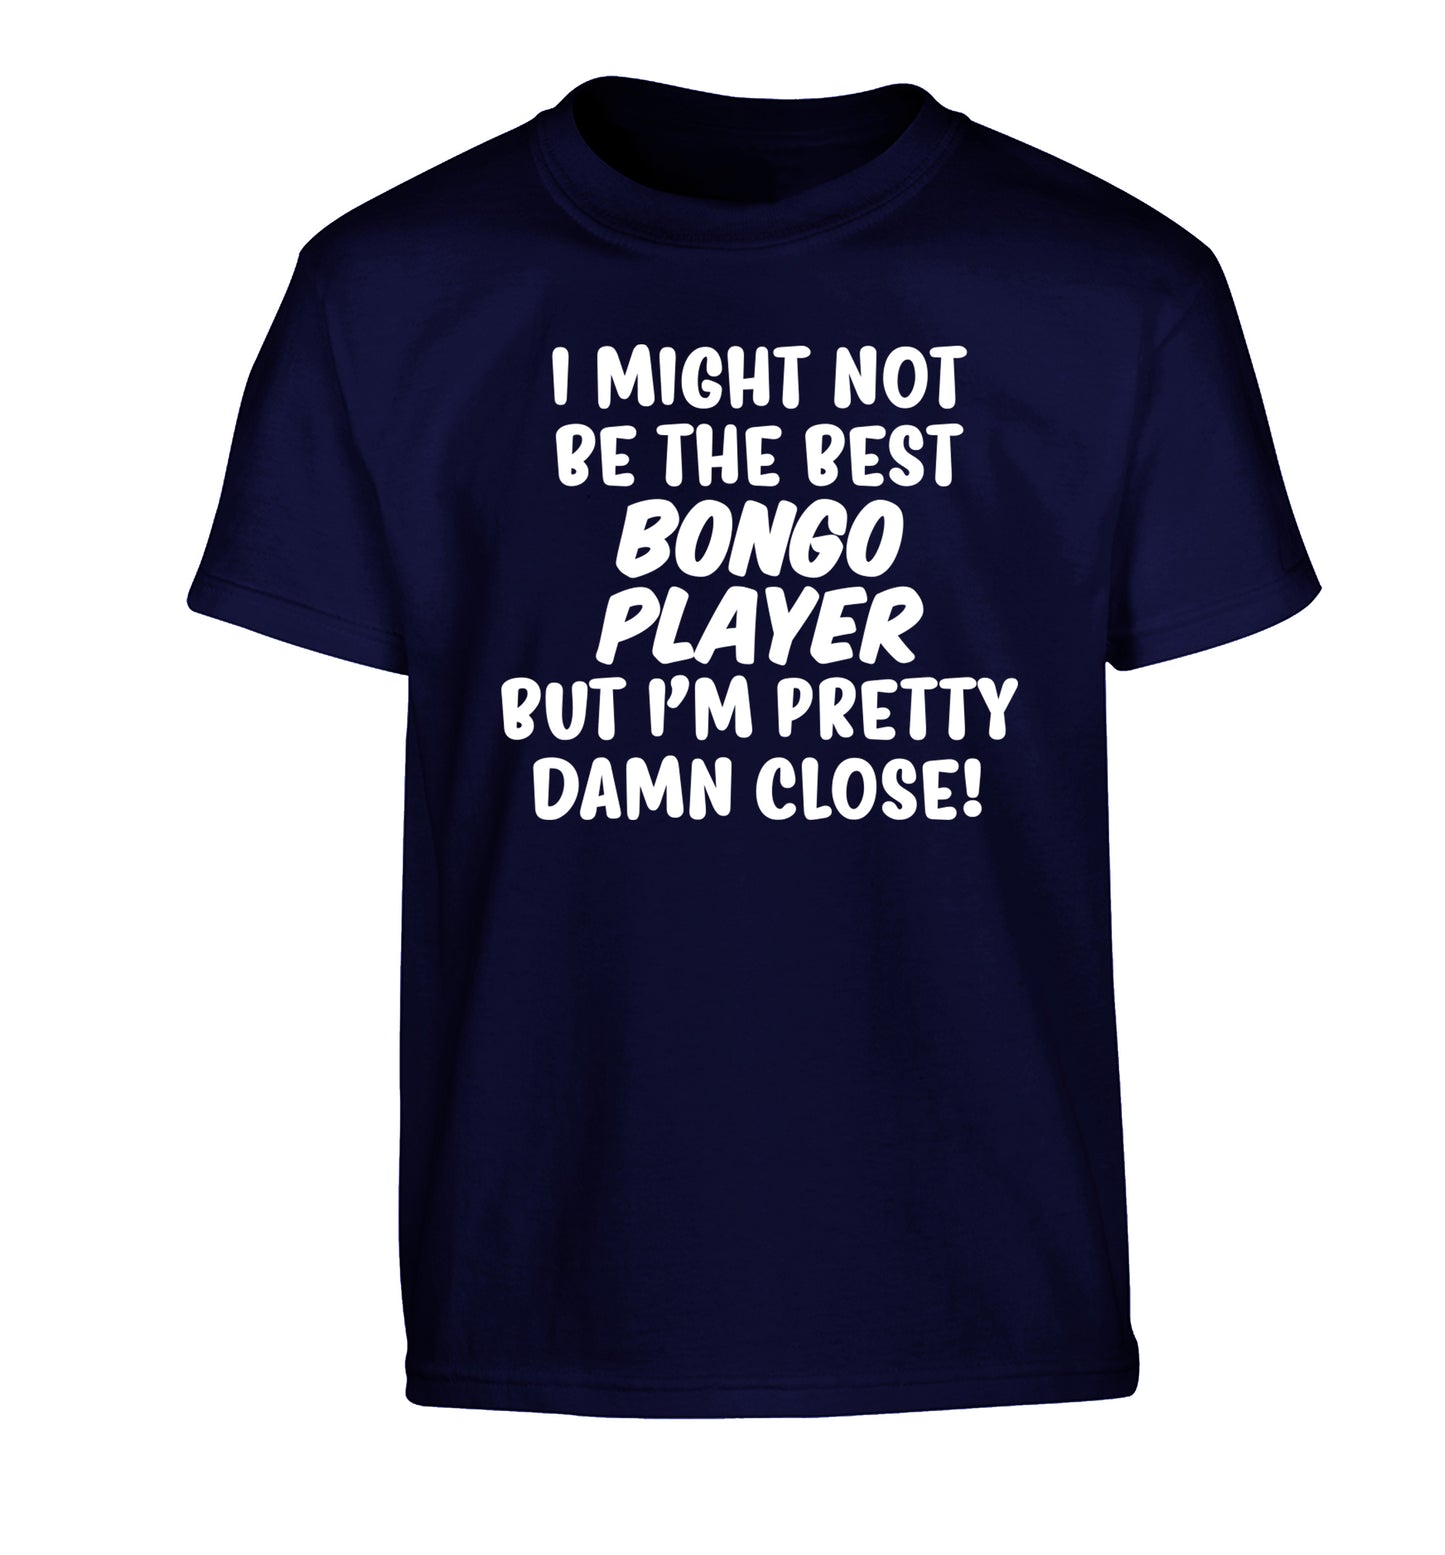 I might not be the best bongo player but I'm pretty close! Children's navy Tshirt 12-14 Years